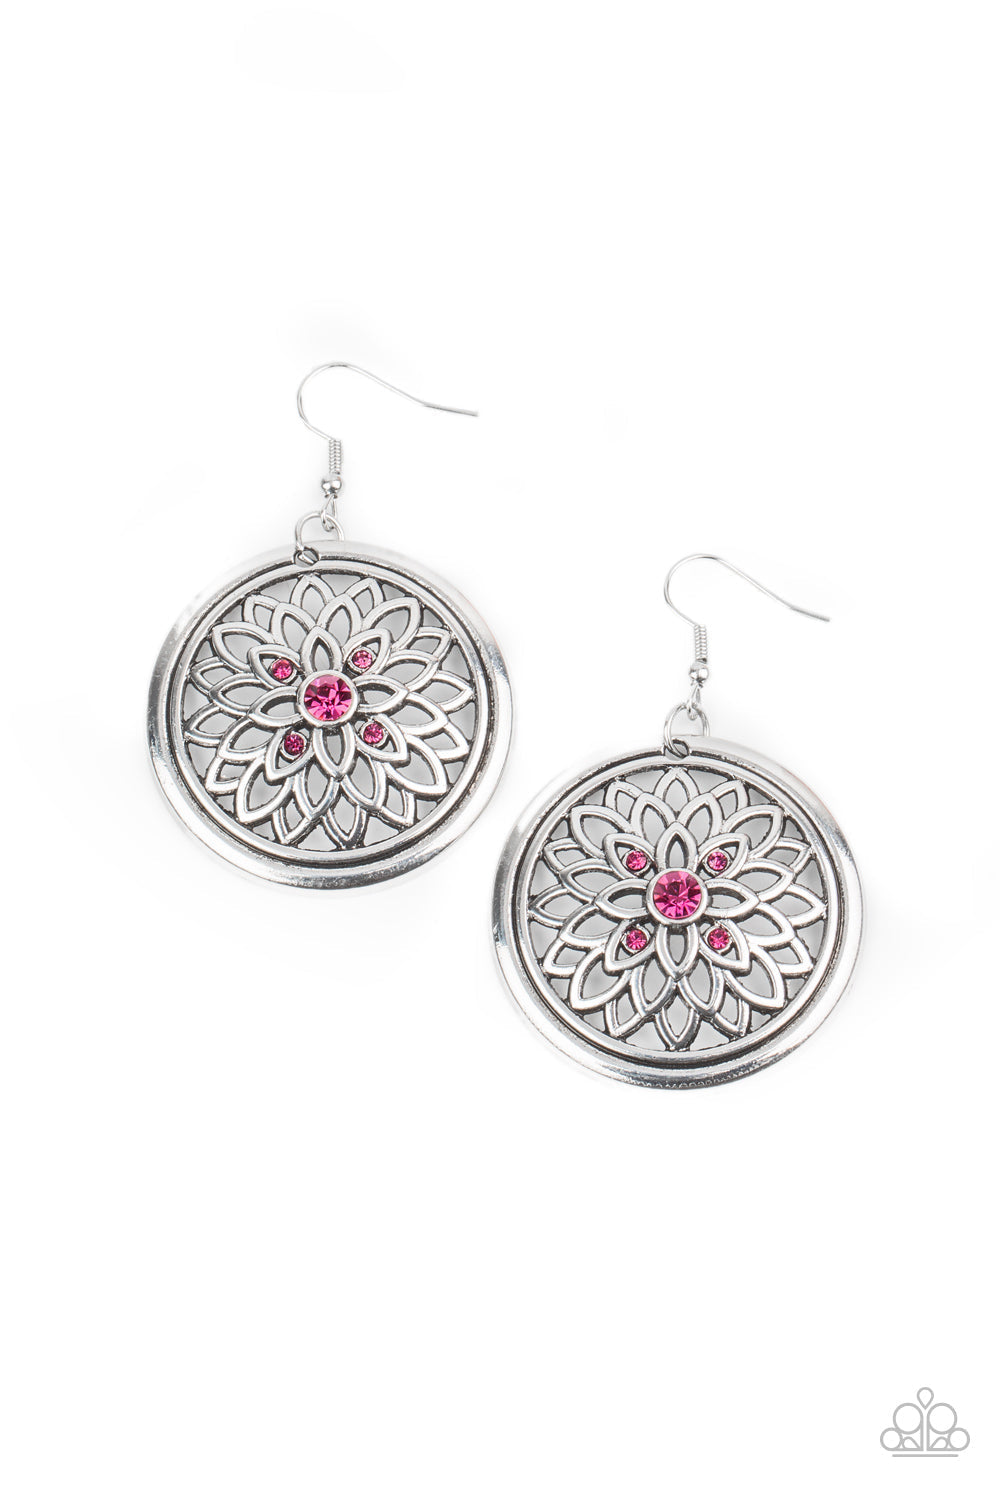 Mega Medallions - Pink and Silver Earrings - Paparazzi Jewelry - Bejeweled Accessories By Kristie - Glittery pink rhinestone center, airy silver petals bloom across the front of a silver hoop, for a sparkly medallion-like frame. Earring attaches to a standard fishhook fitting.